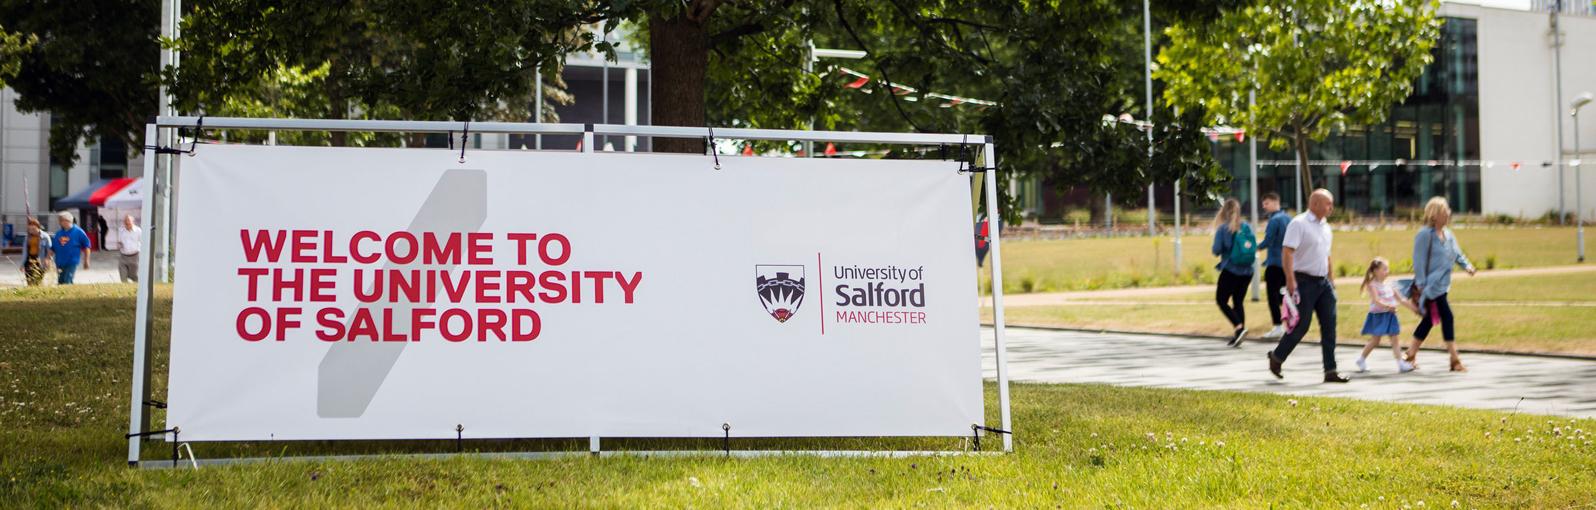 Welcome to the University of Salford signage on campus